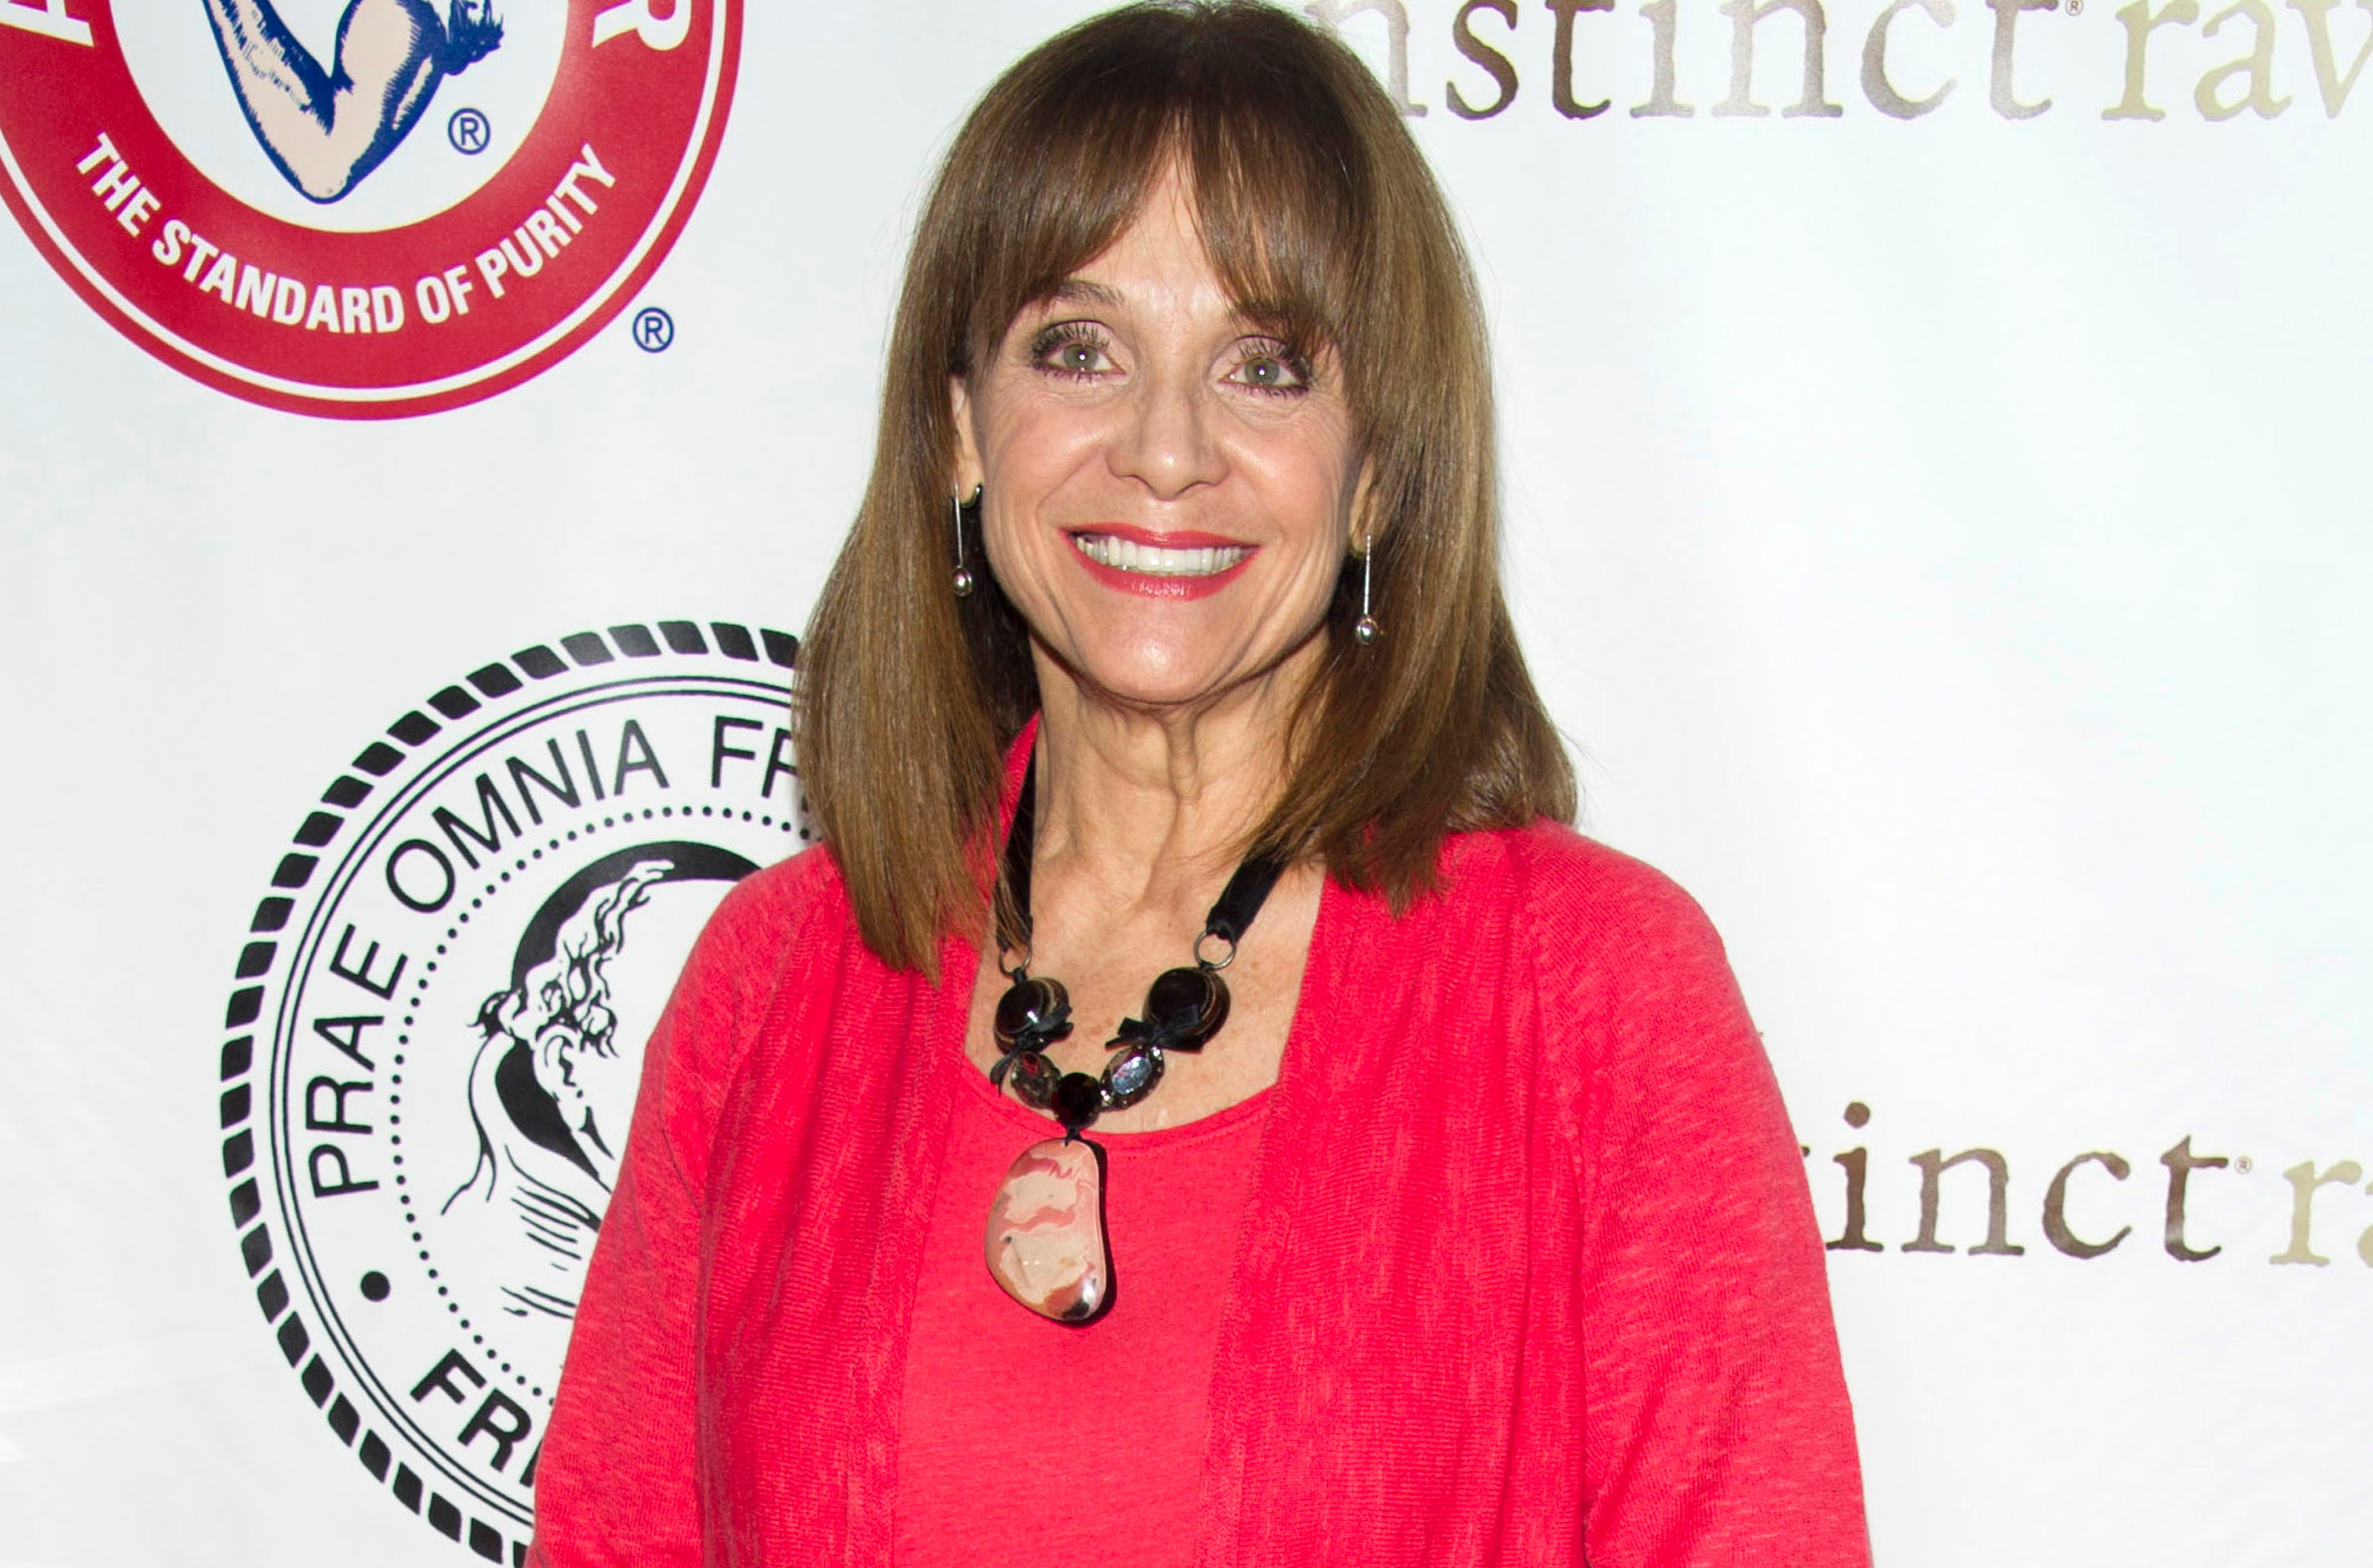 Stars react to death of Valerie Harper, 80, comic actress from ‘Mary Tyler Moore Show, ‘Rhoda’